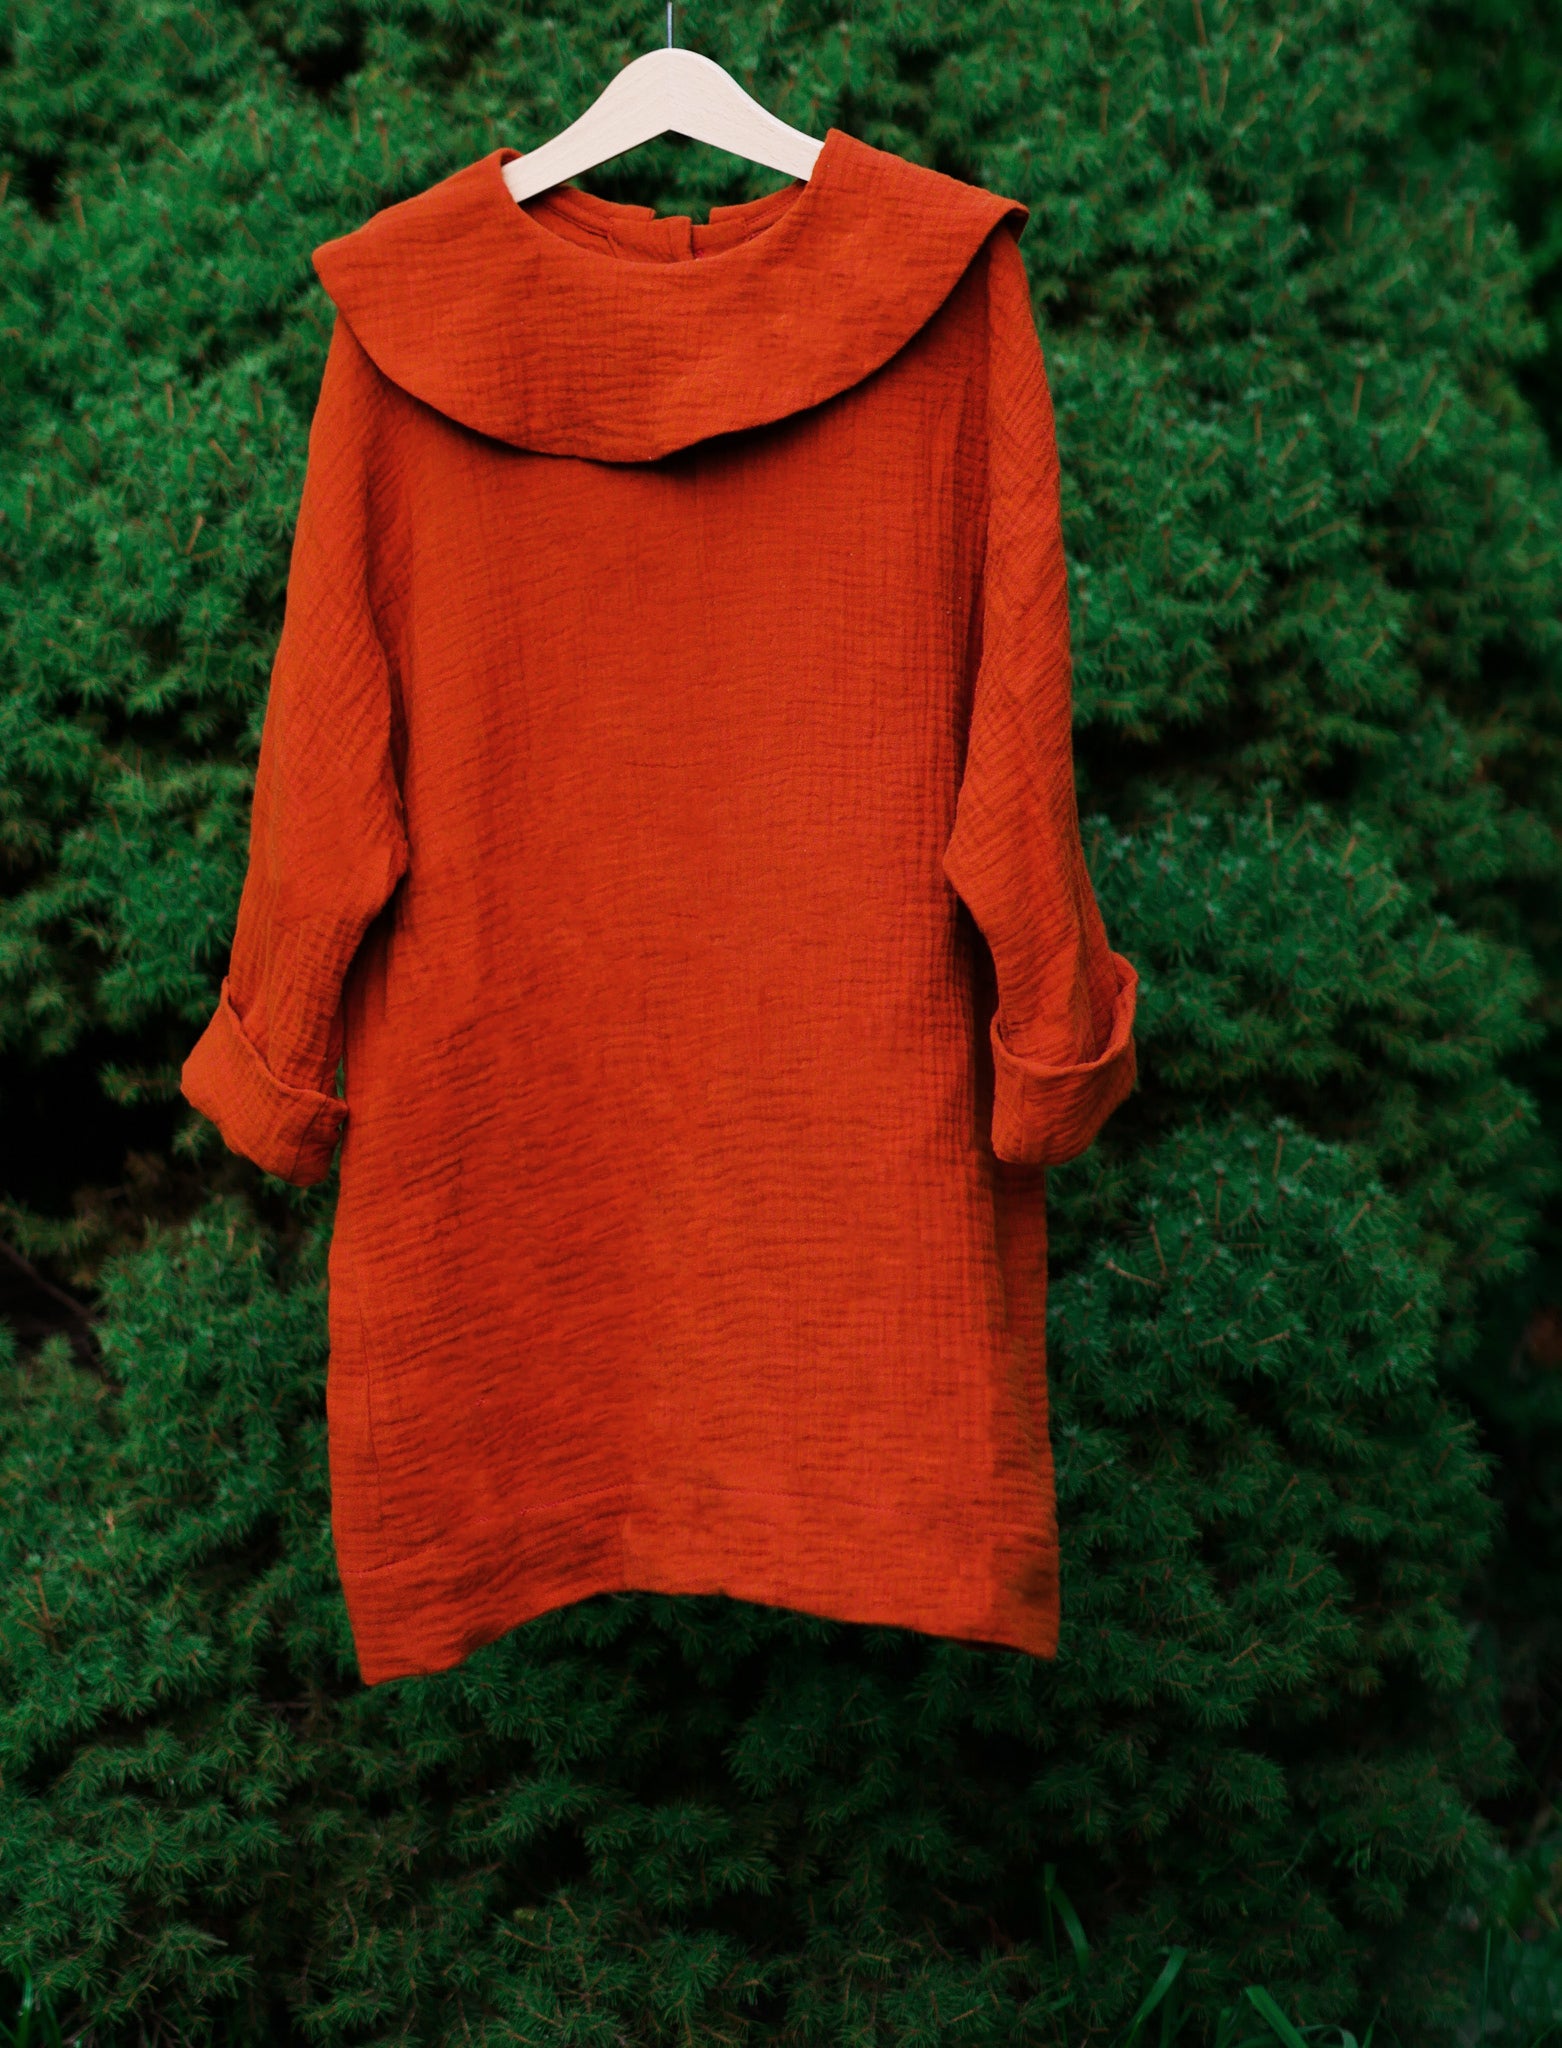 caramel dress with long sleeves with big, round collar